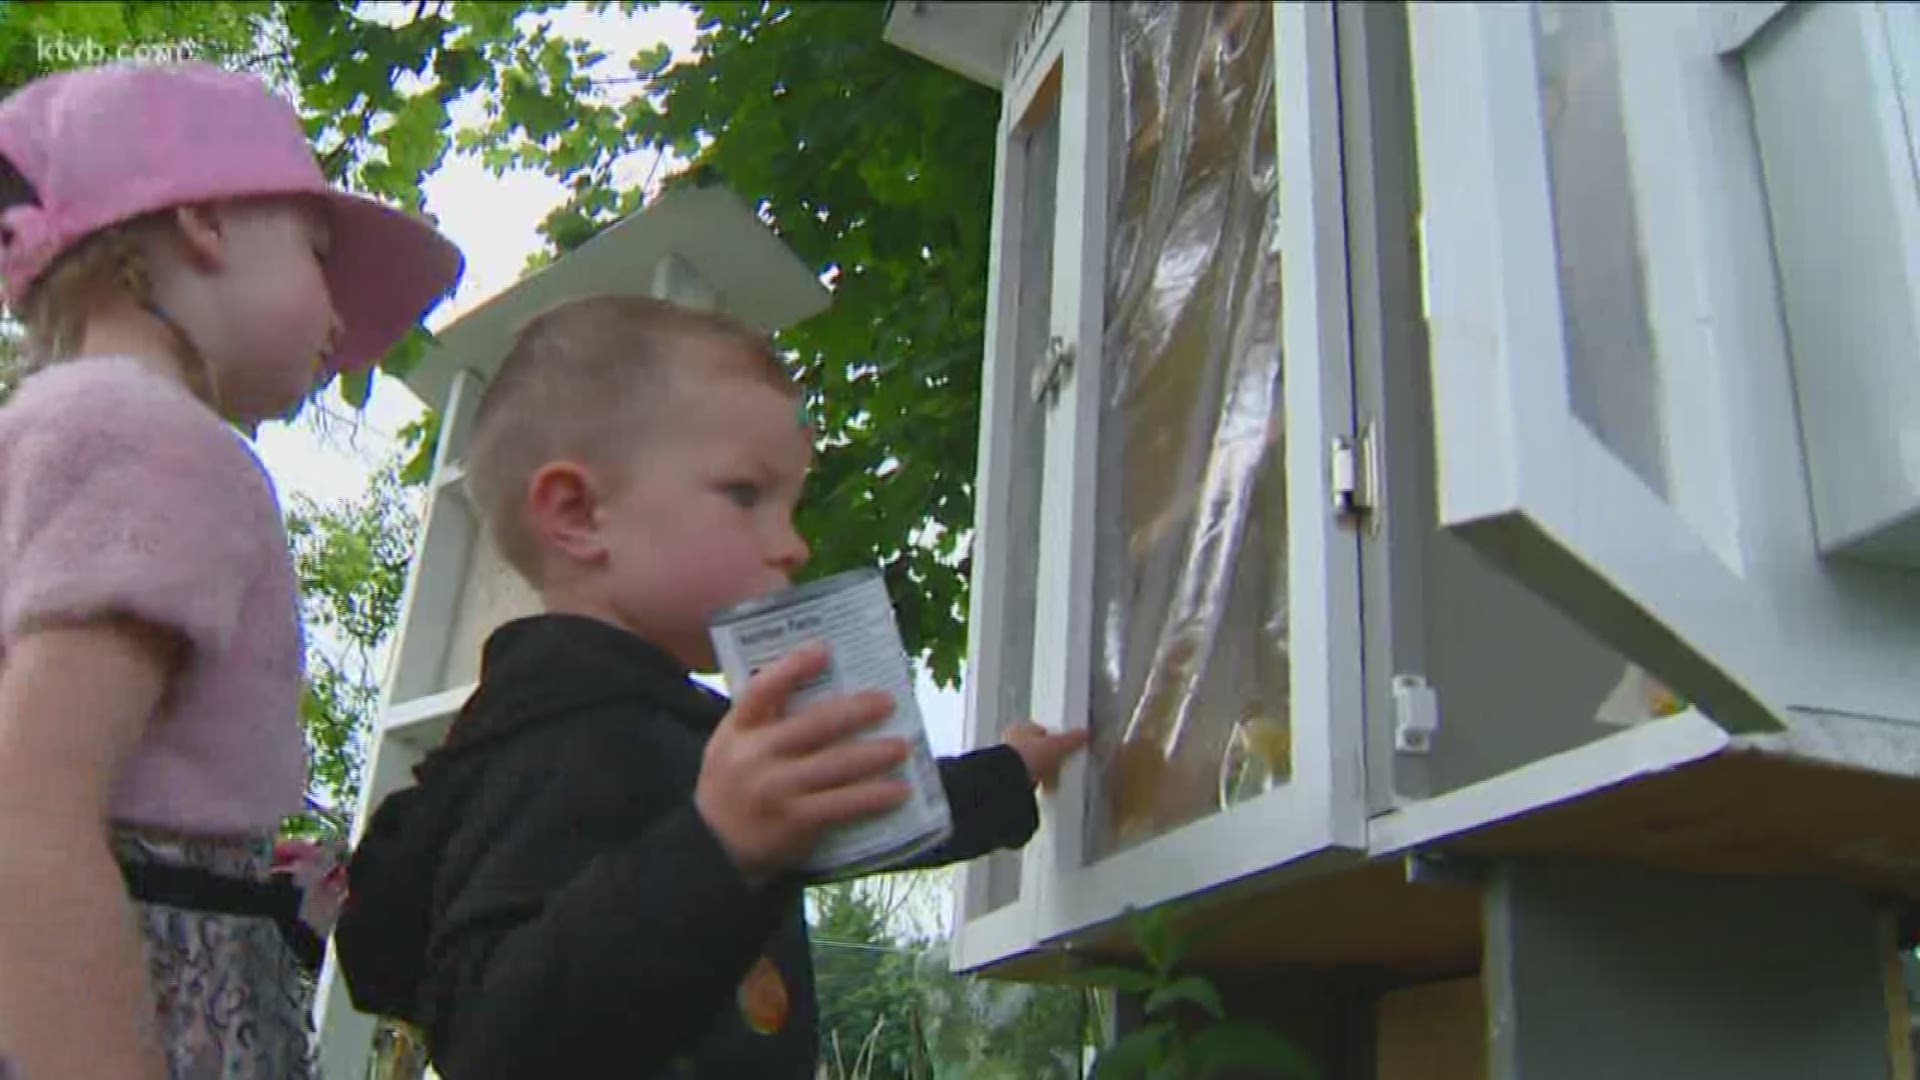 A Boise toddler asked for canned goods for his birthday so he could help stock a pantry that helps feed those in need.